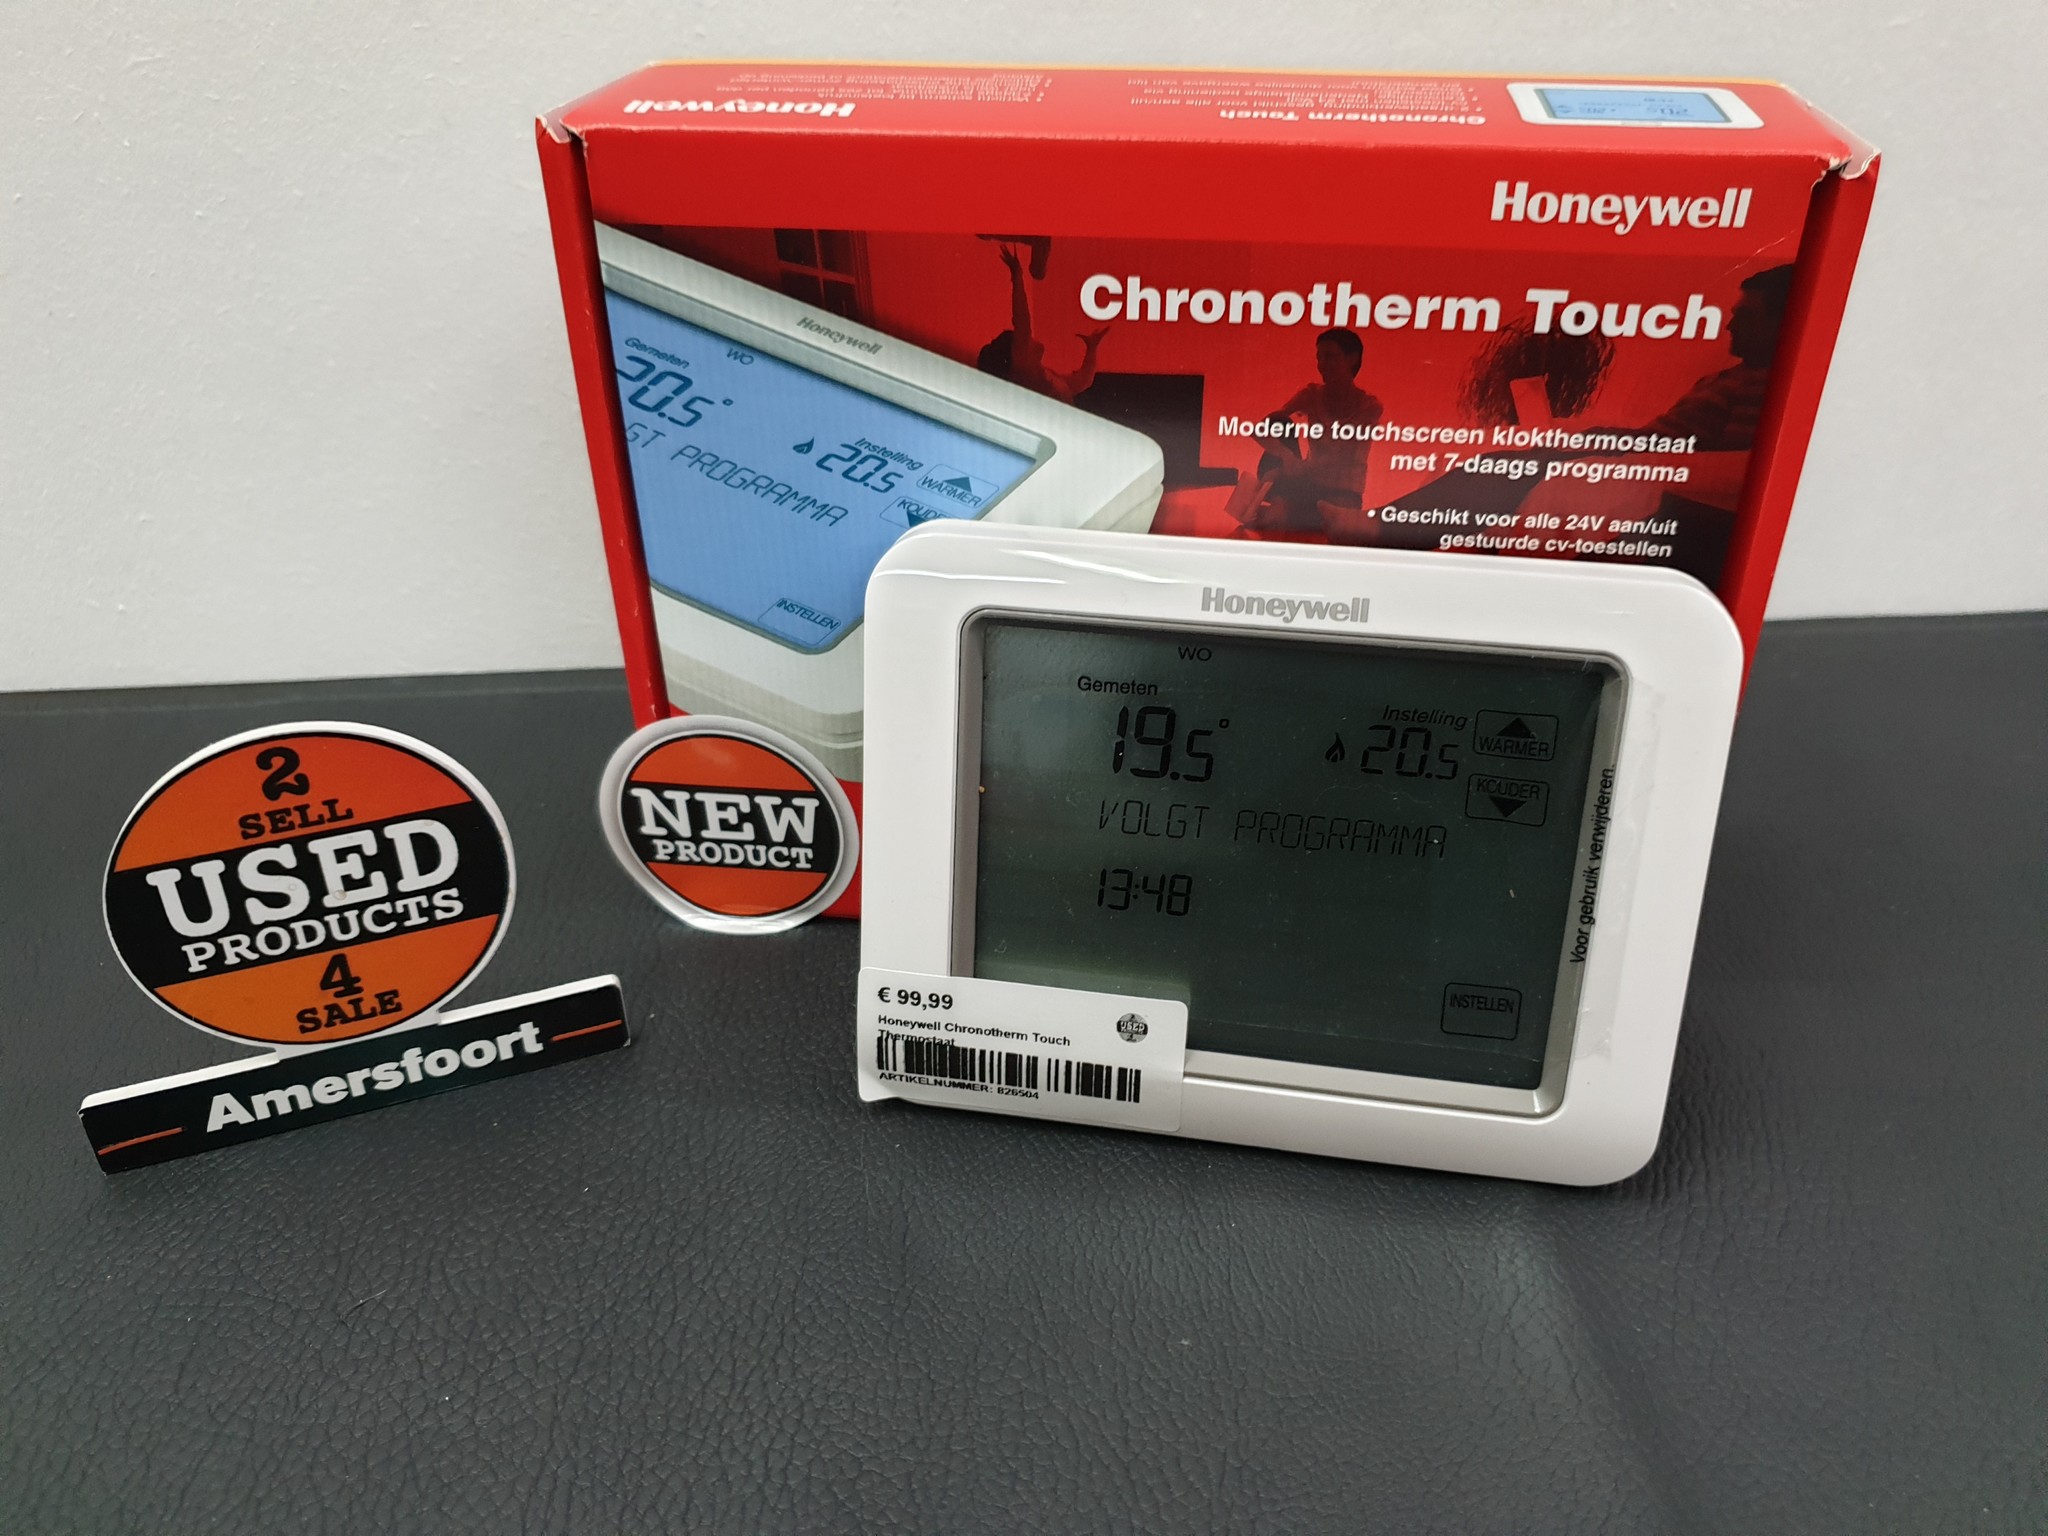 Huidige radar Berg Honeywell Chronotherm Touch Thermostaat - Used Products Amersfoort